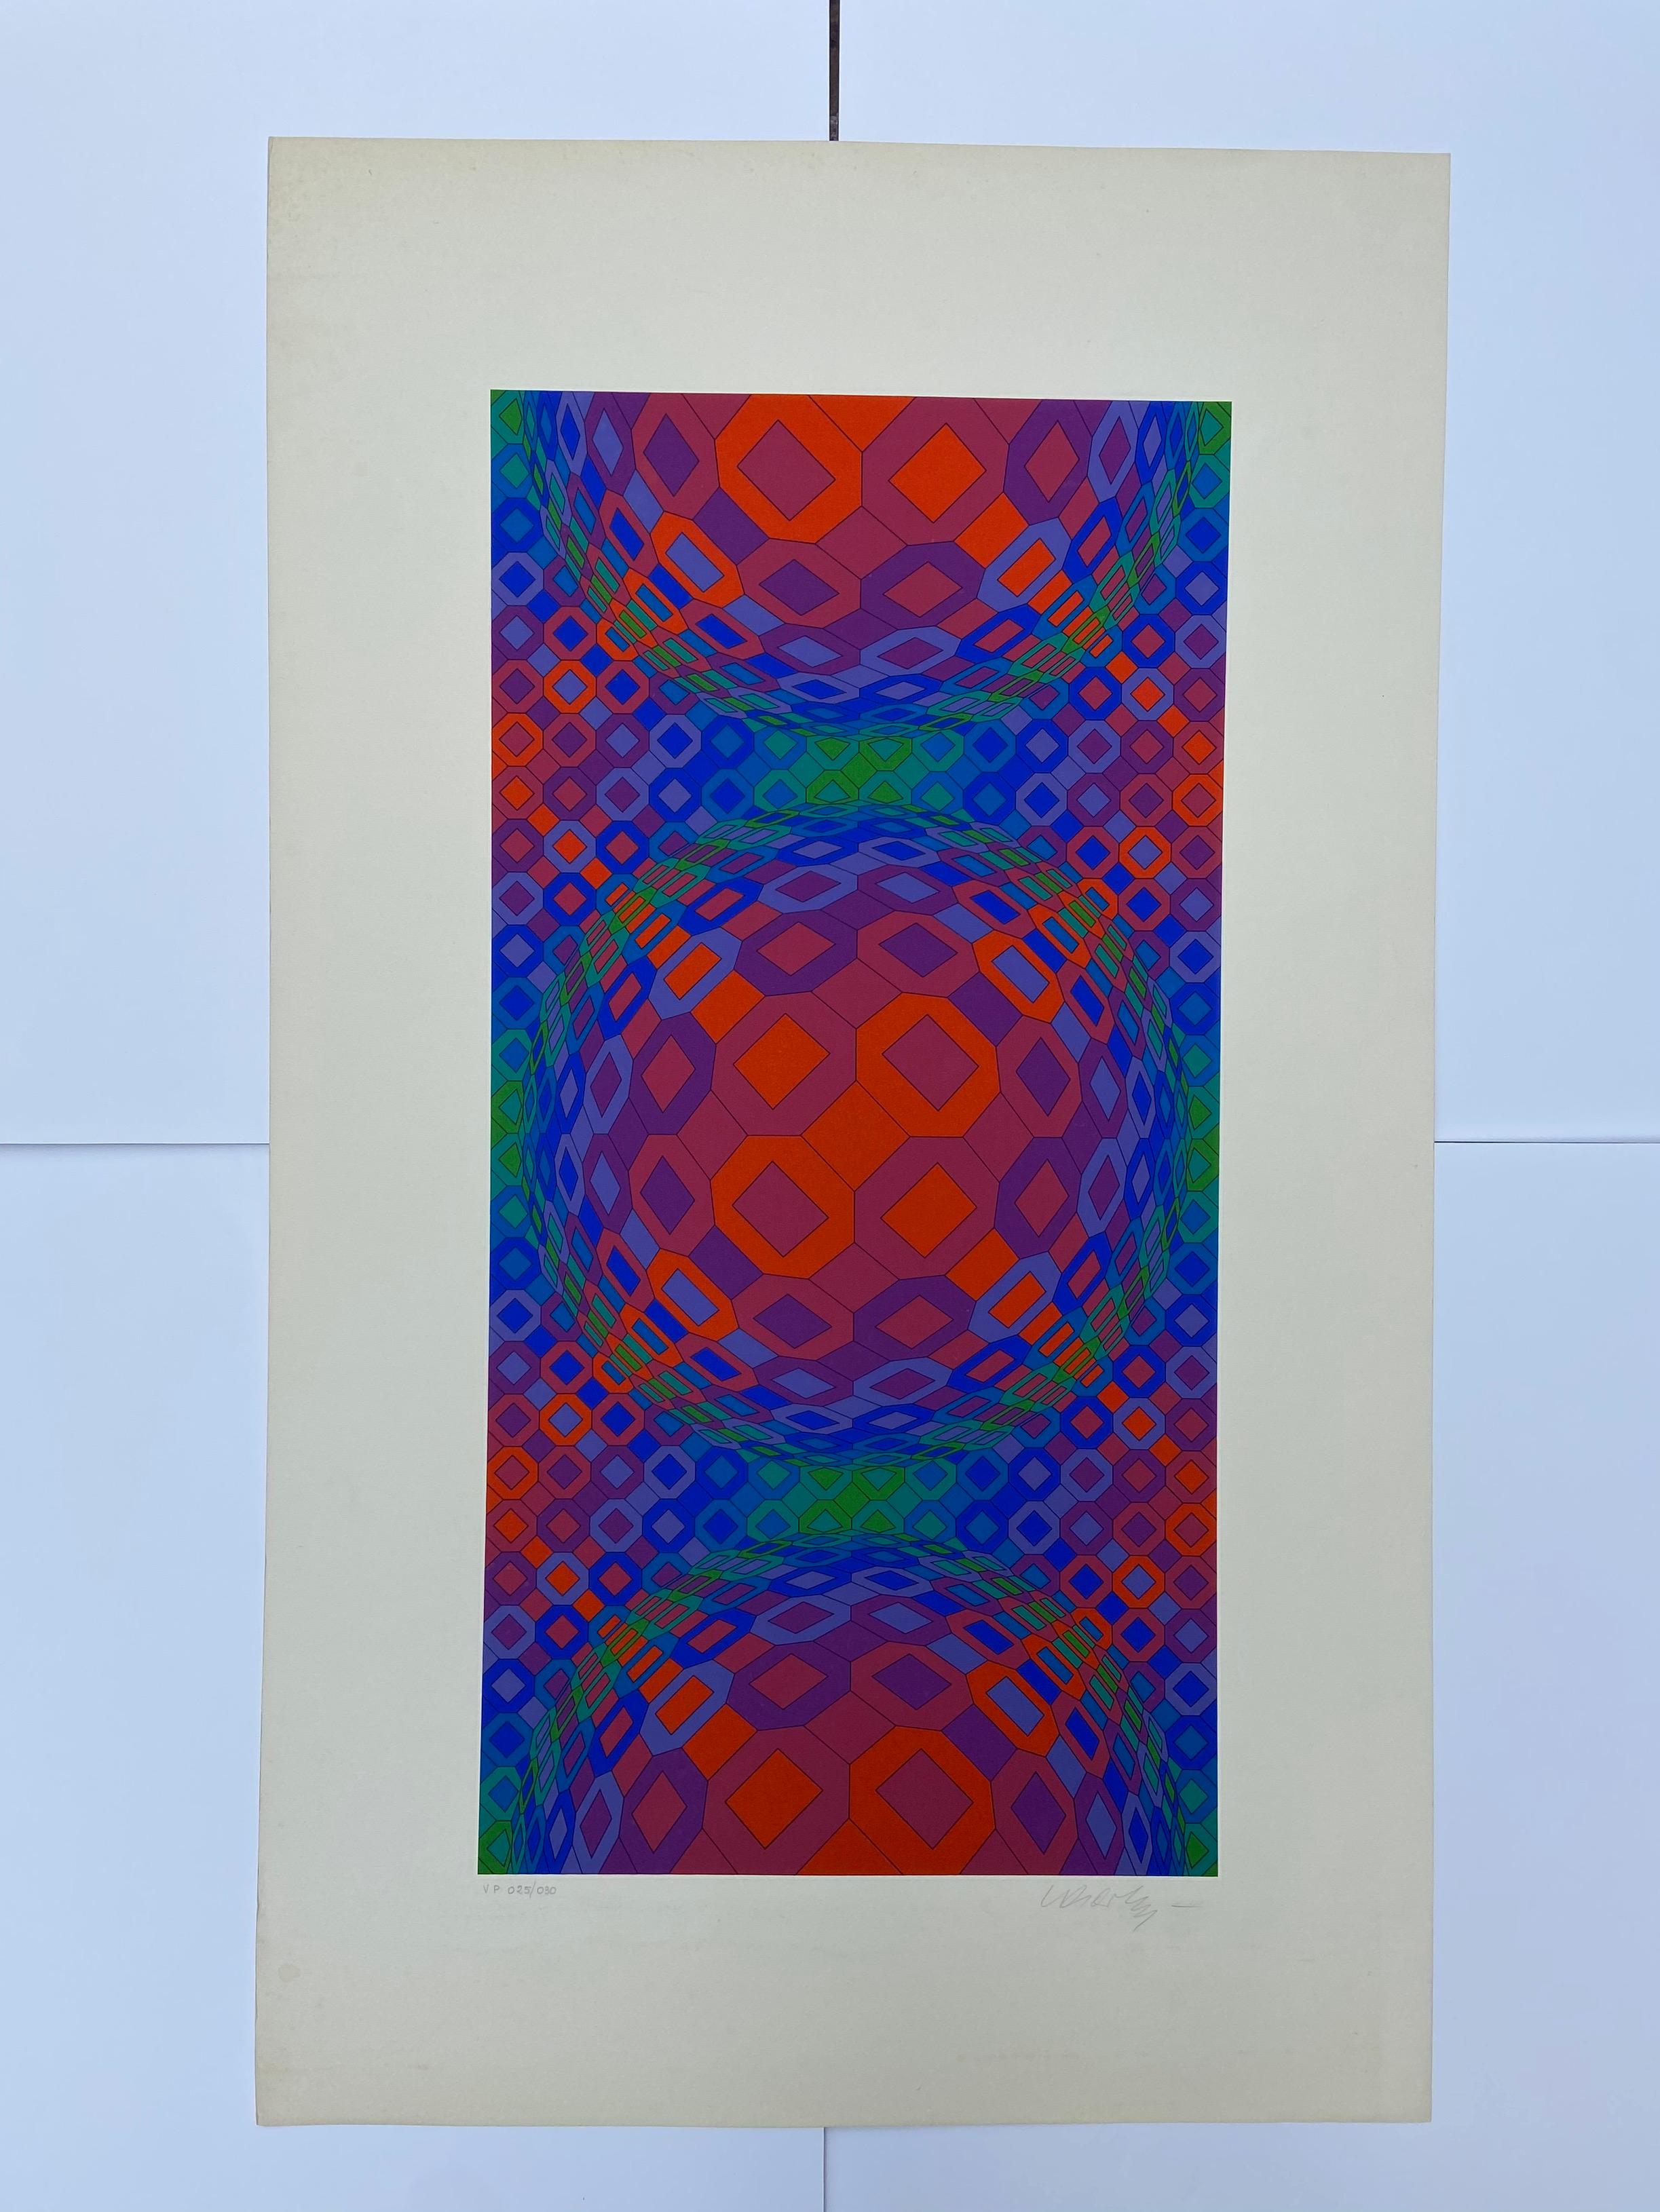 Victor Vasarely Abstract Print - Vasarely - Kinetics 1 - 1965